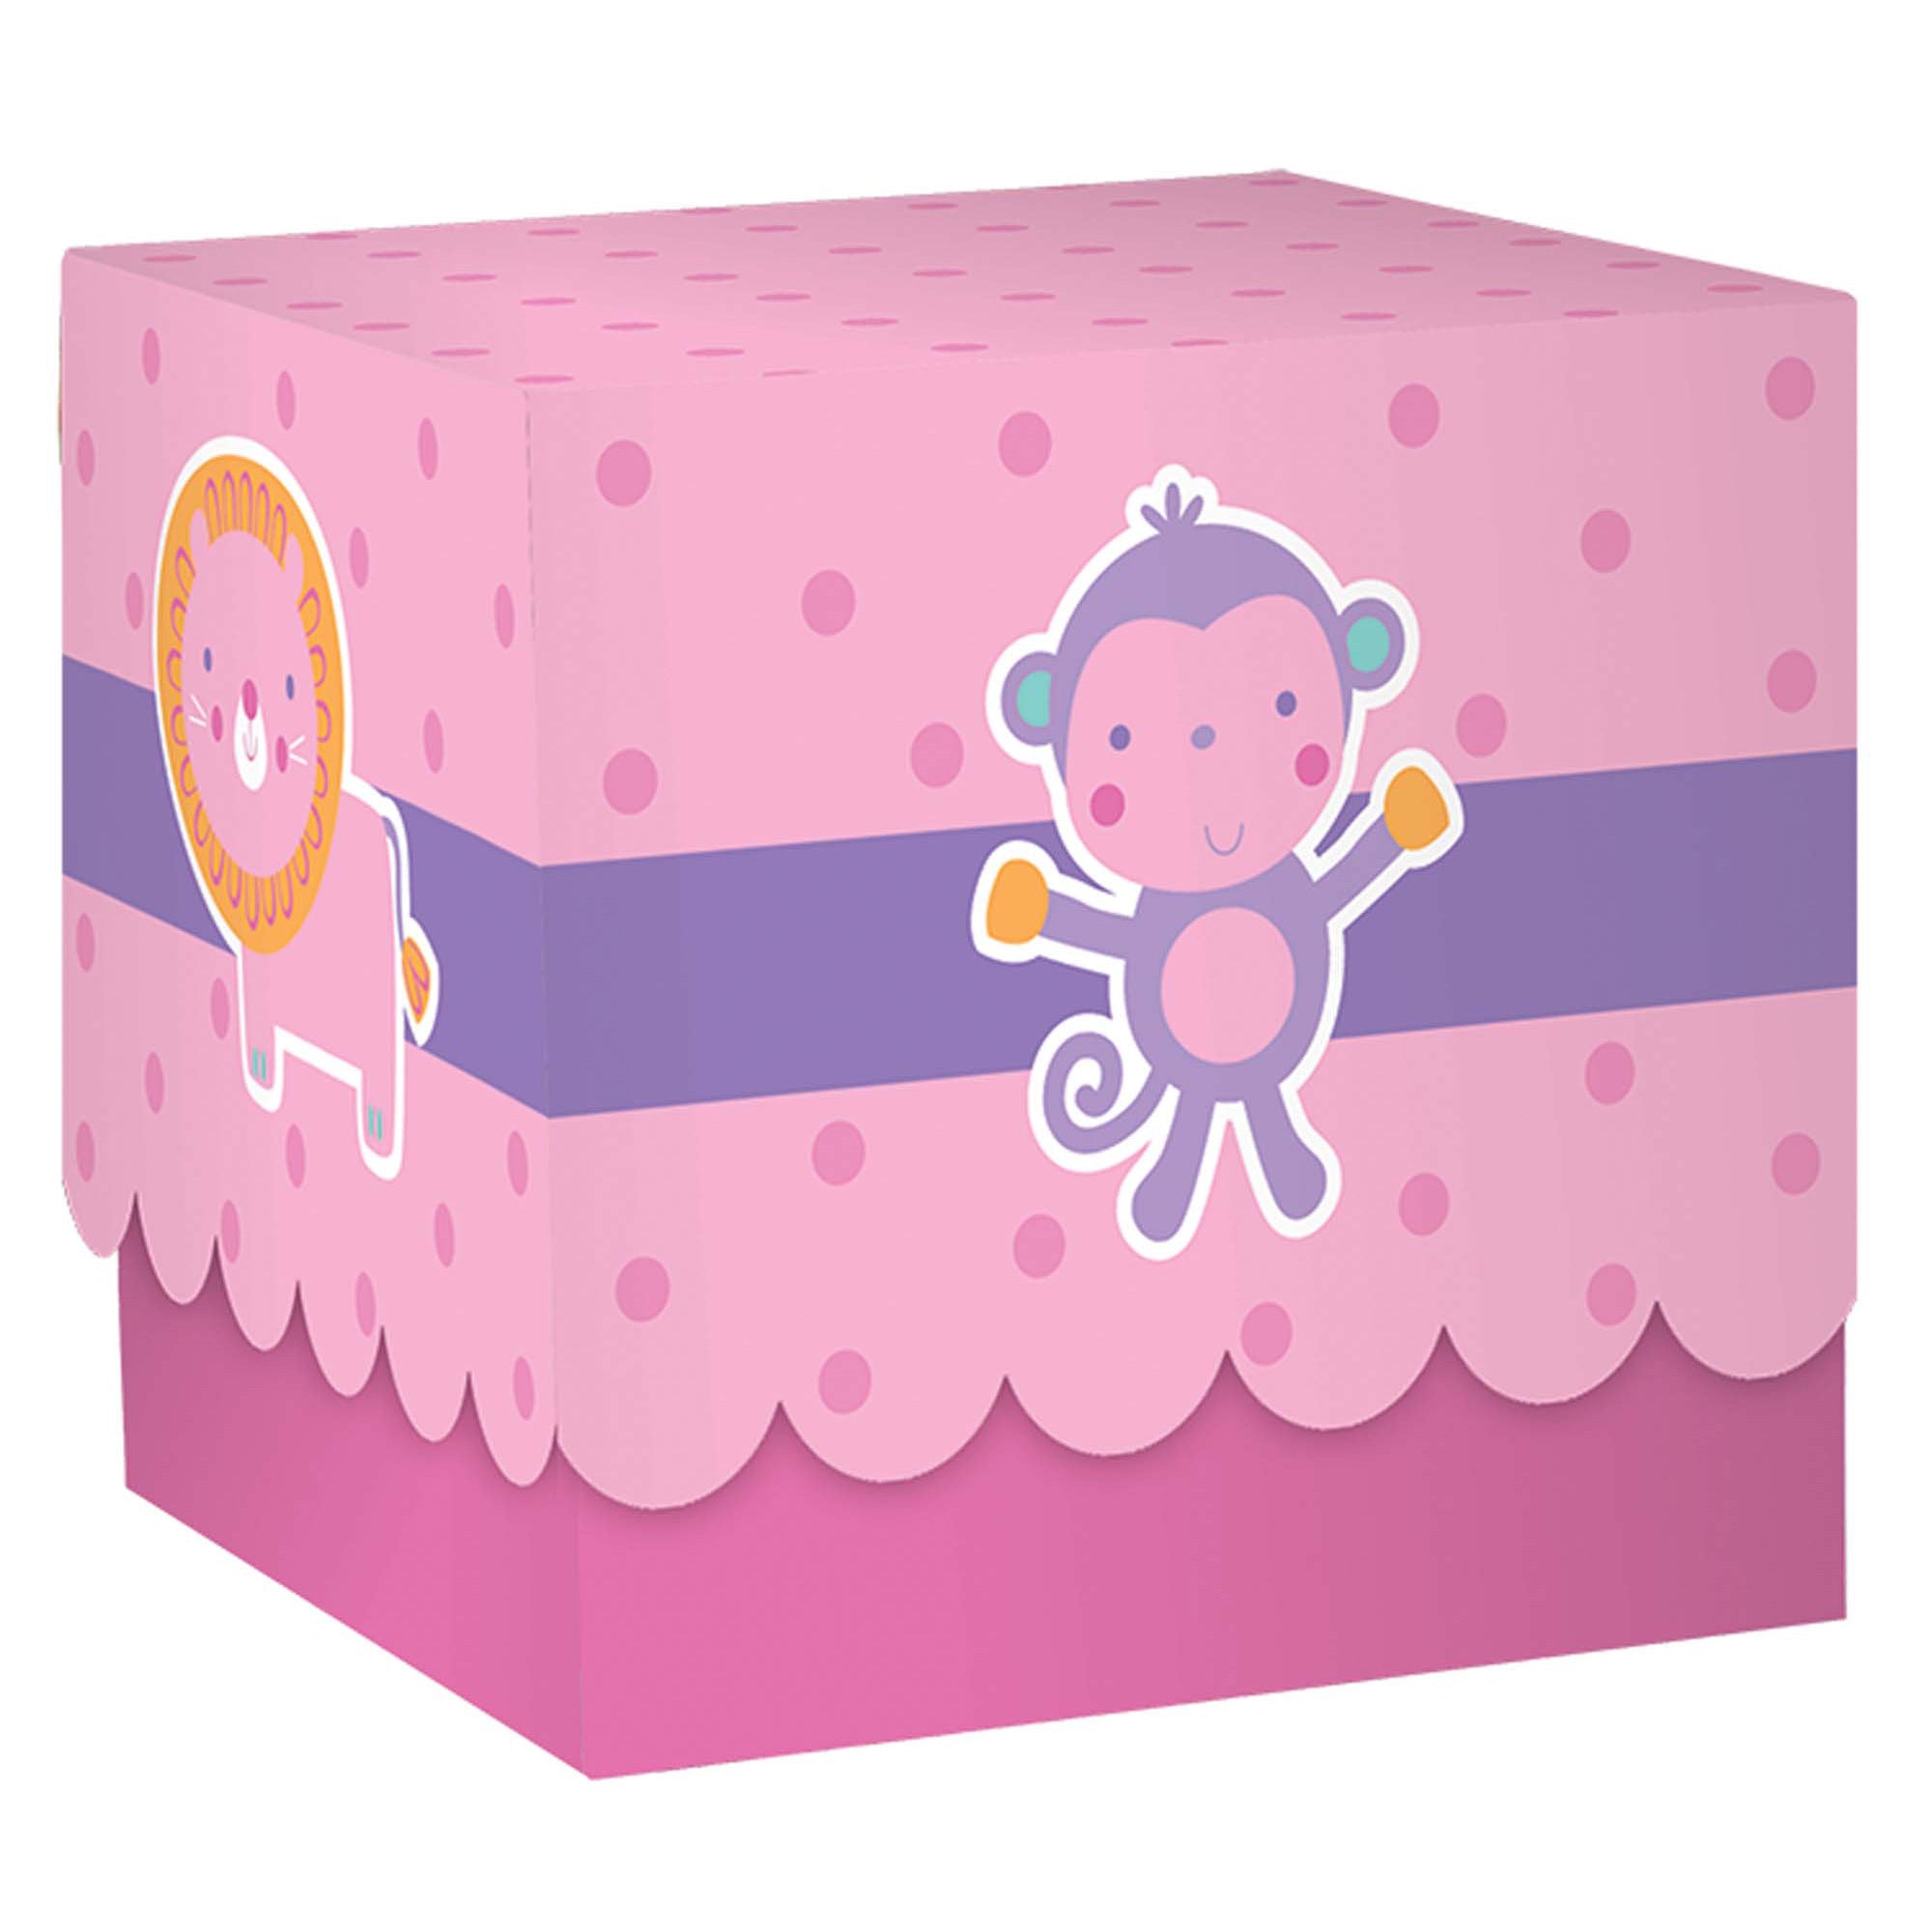 Baby Shower Pink Printed Paper Boxes 24pcs